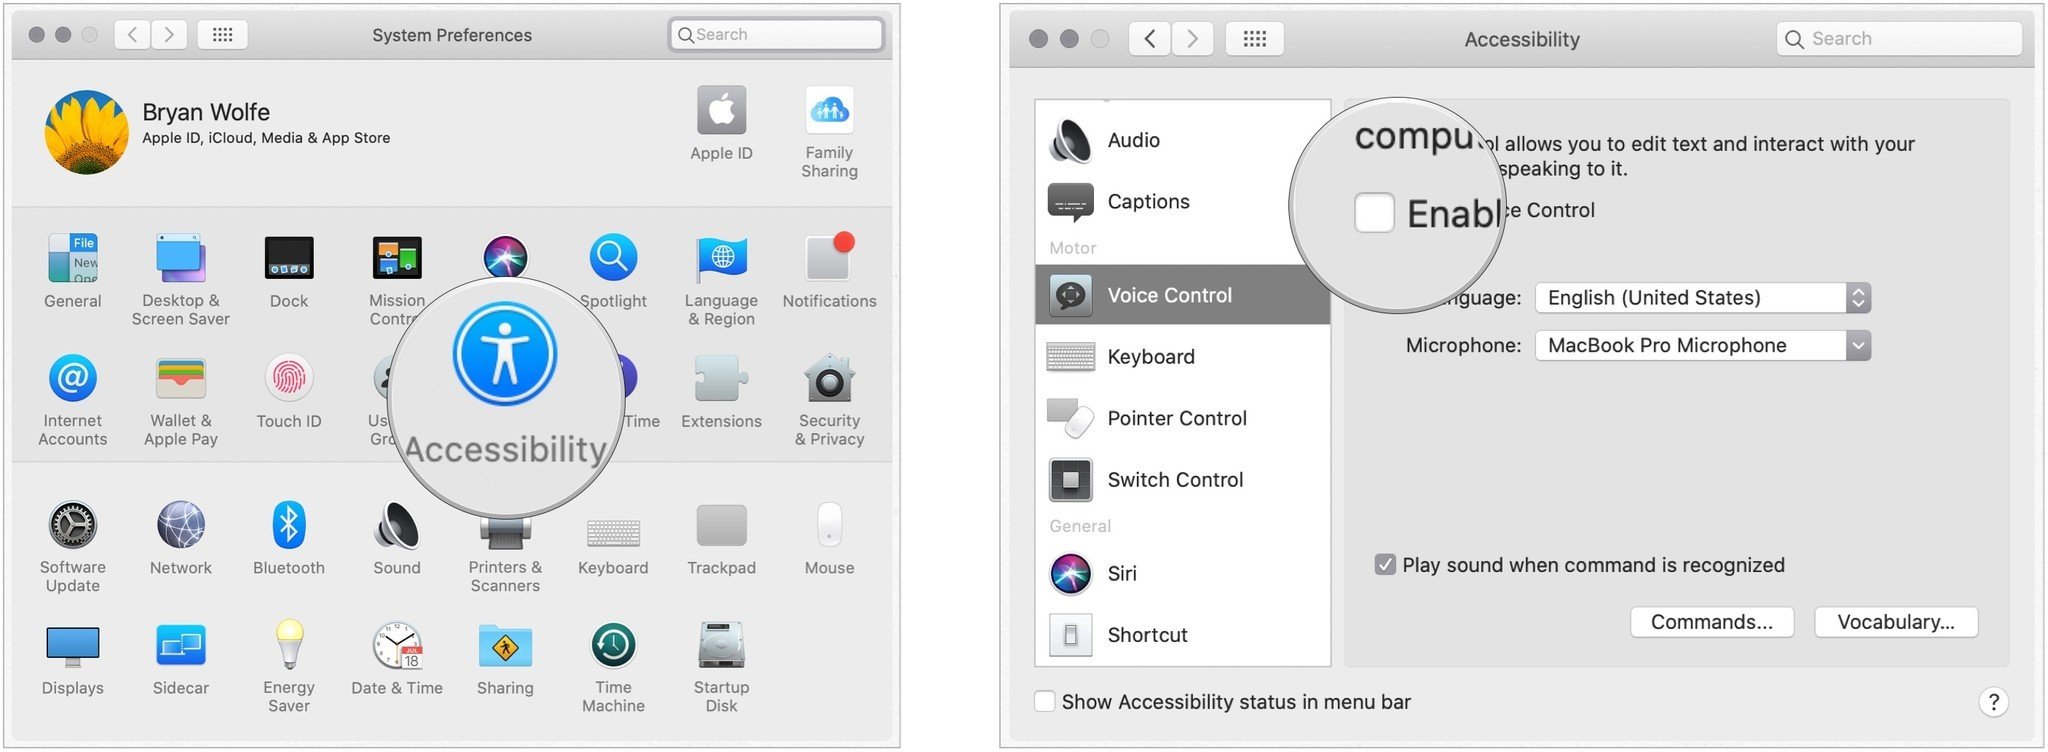 To turn on Voice Control, click on System Preferences on your Mac's dock, then select Accessibility. Tap Voice Control under the Motor section. Finally, check the box for Enable Voice control